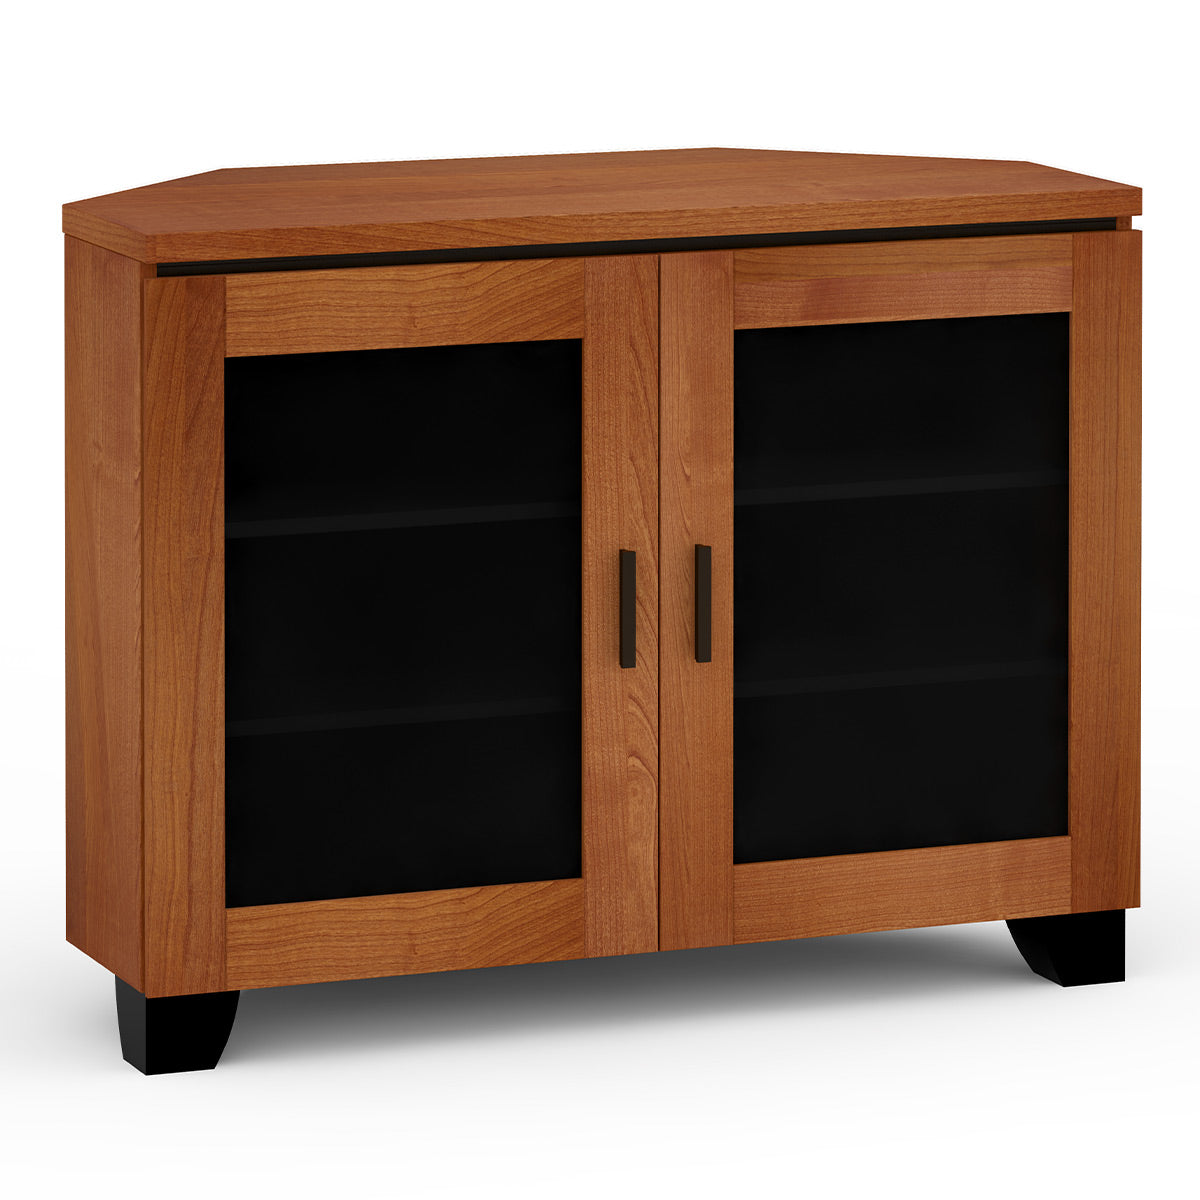 Salamander Chameleon Collection Elba 323 Twin Corner AV Cabinet (Wide Framed American Cherry Doors with Smoked Glass Inserts)